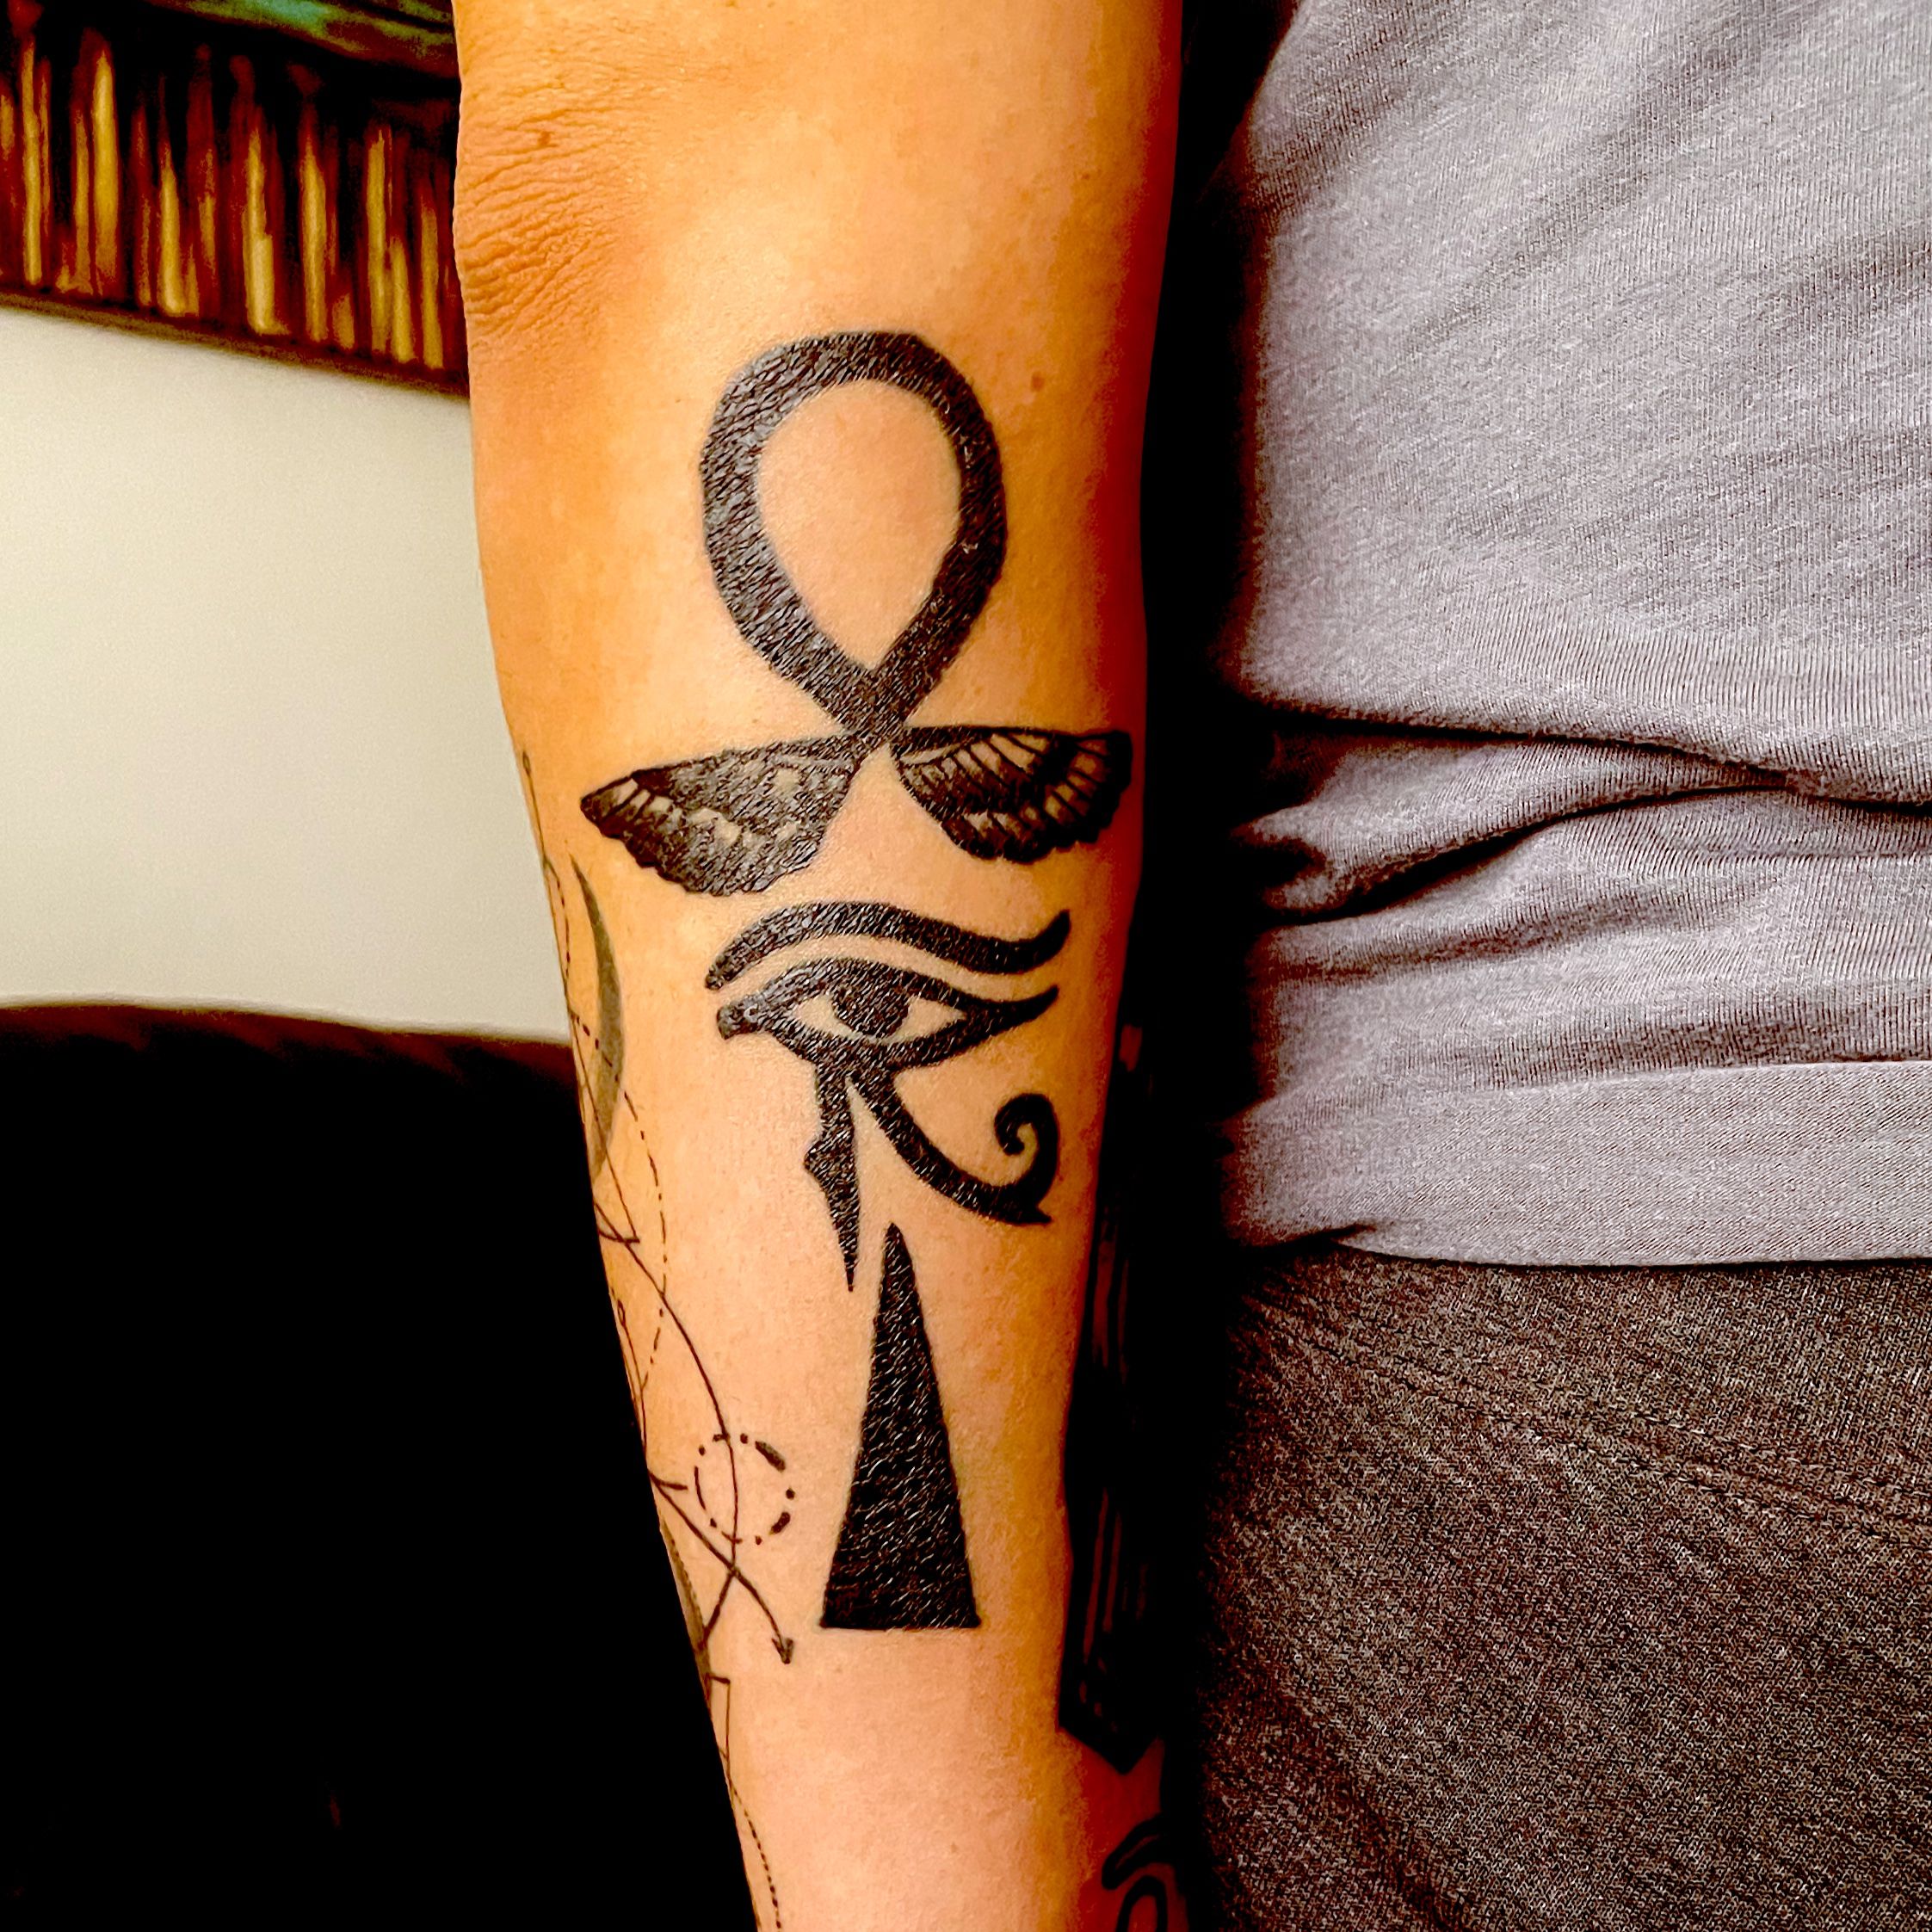 Thoth you guys might like my first tattoo  rancientegypt